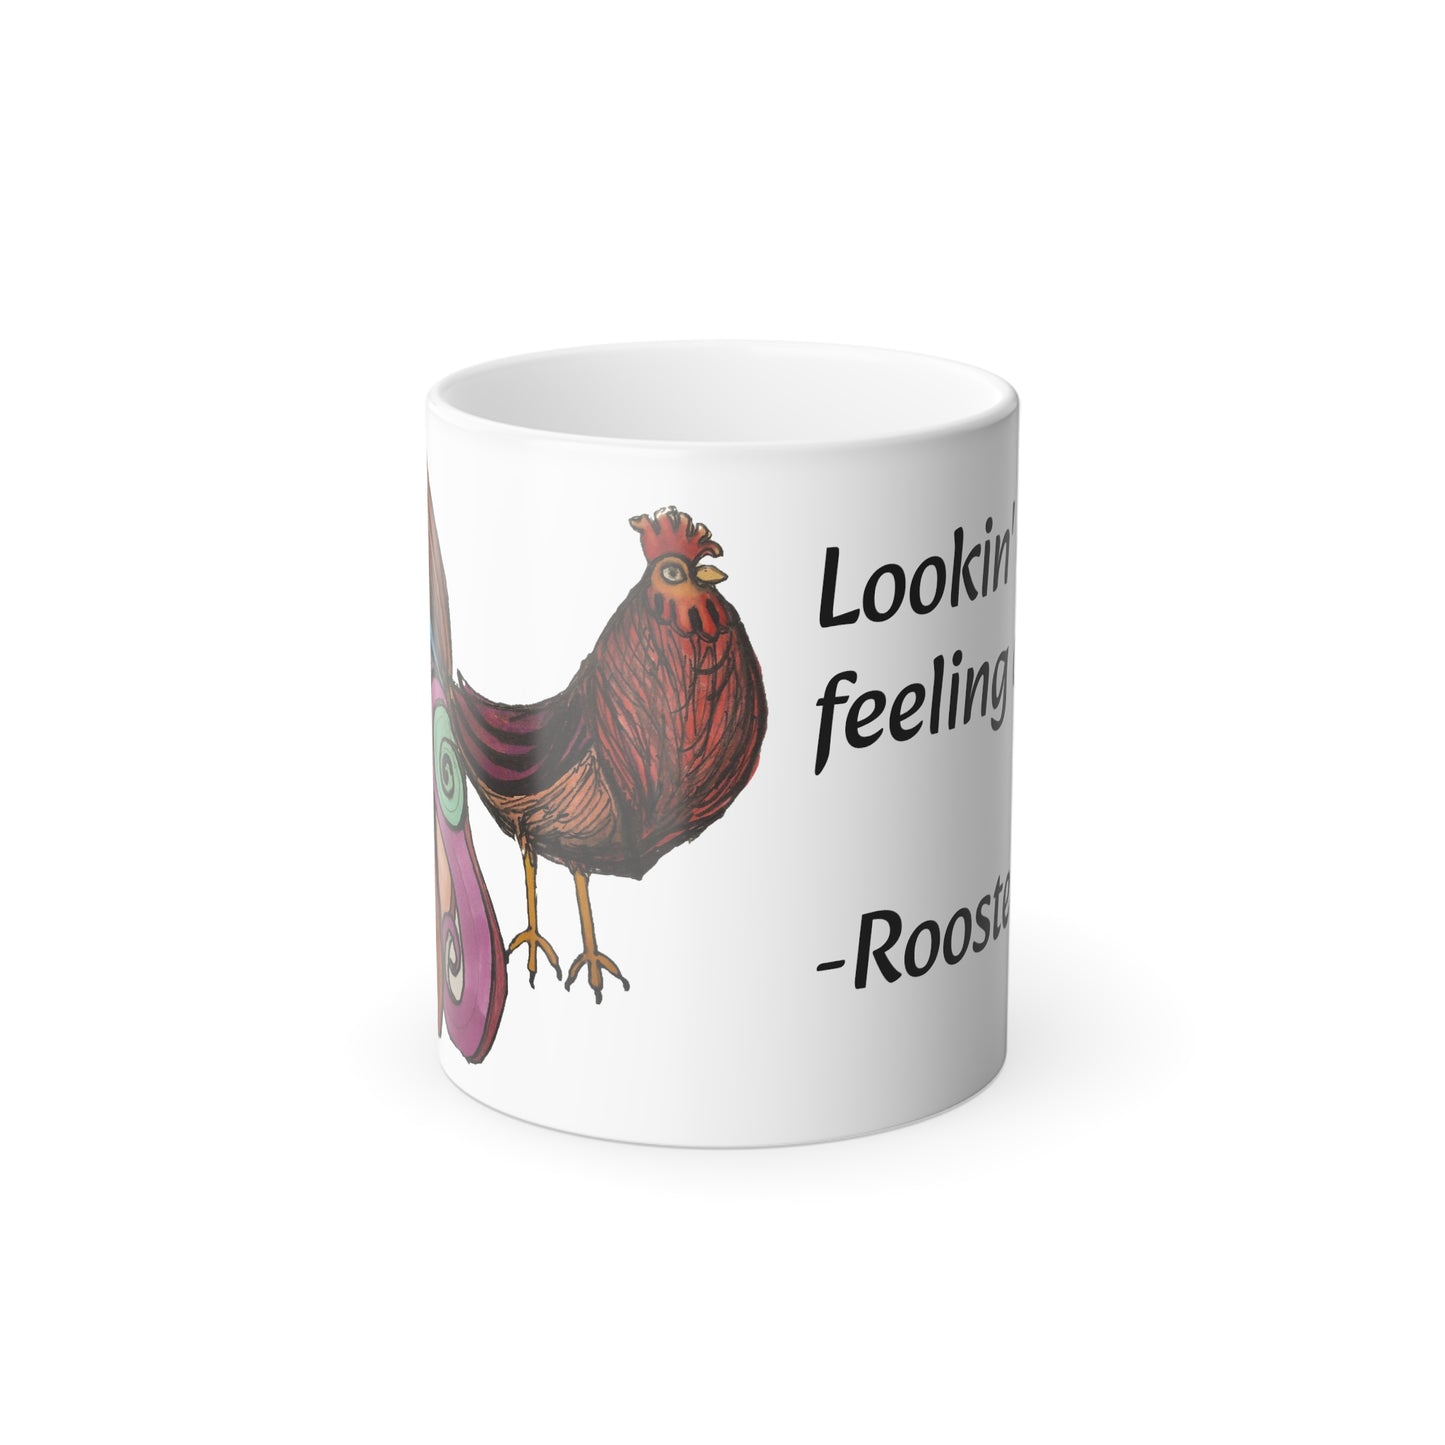 Signed Rooster™ Color Morphing Mug, 11oz looking cocky feeling clucky